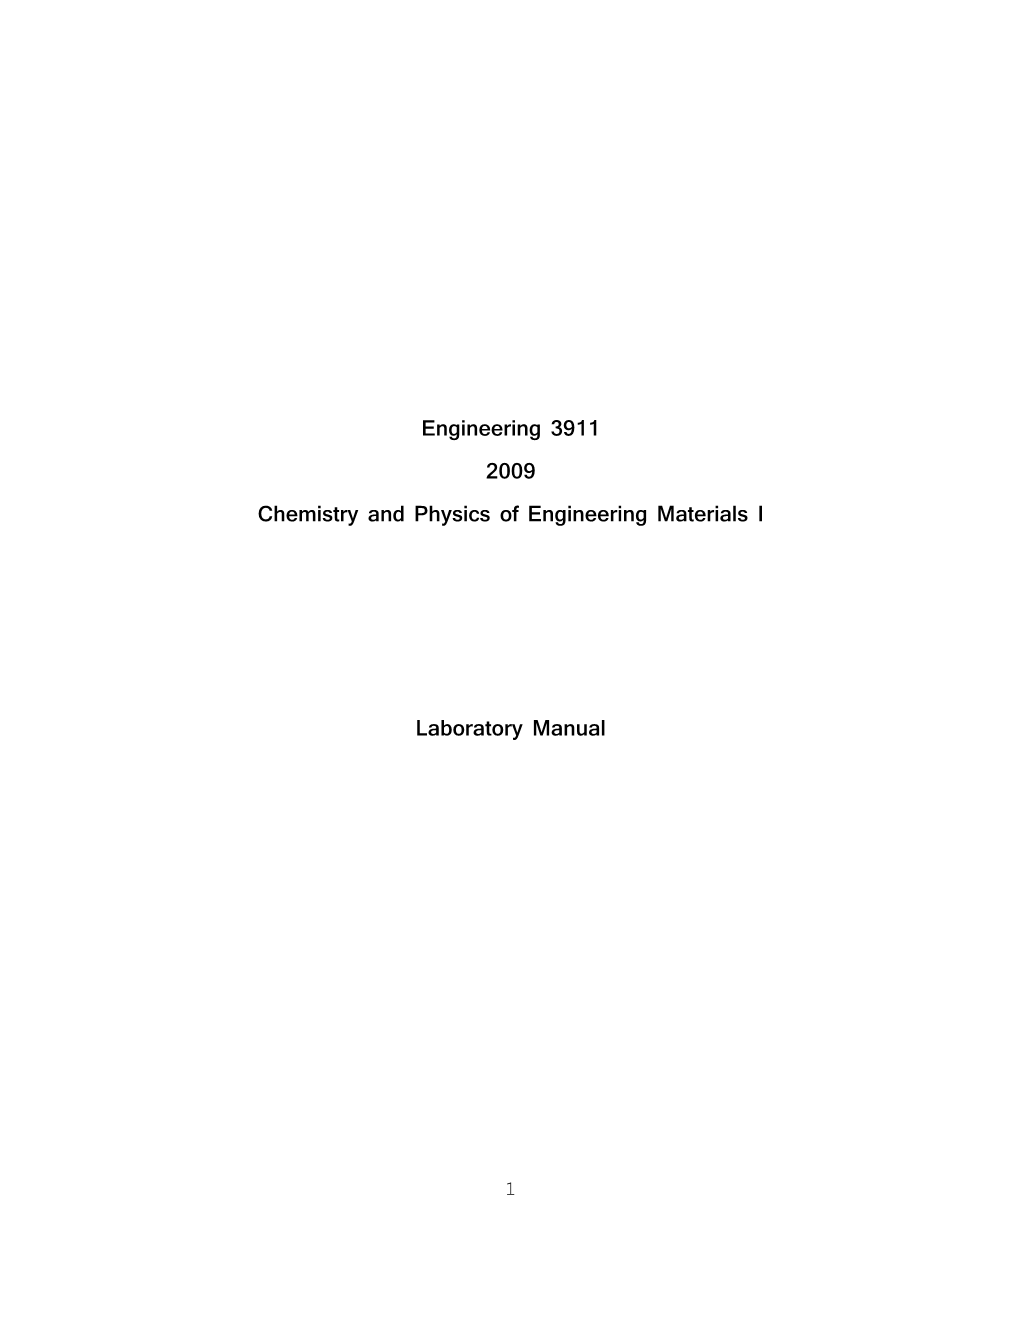 Chemistry and Physics of Engineering Materials I